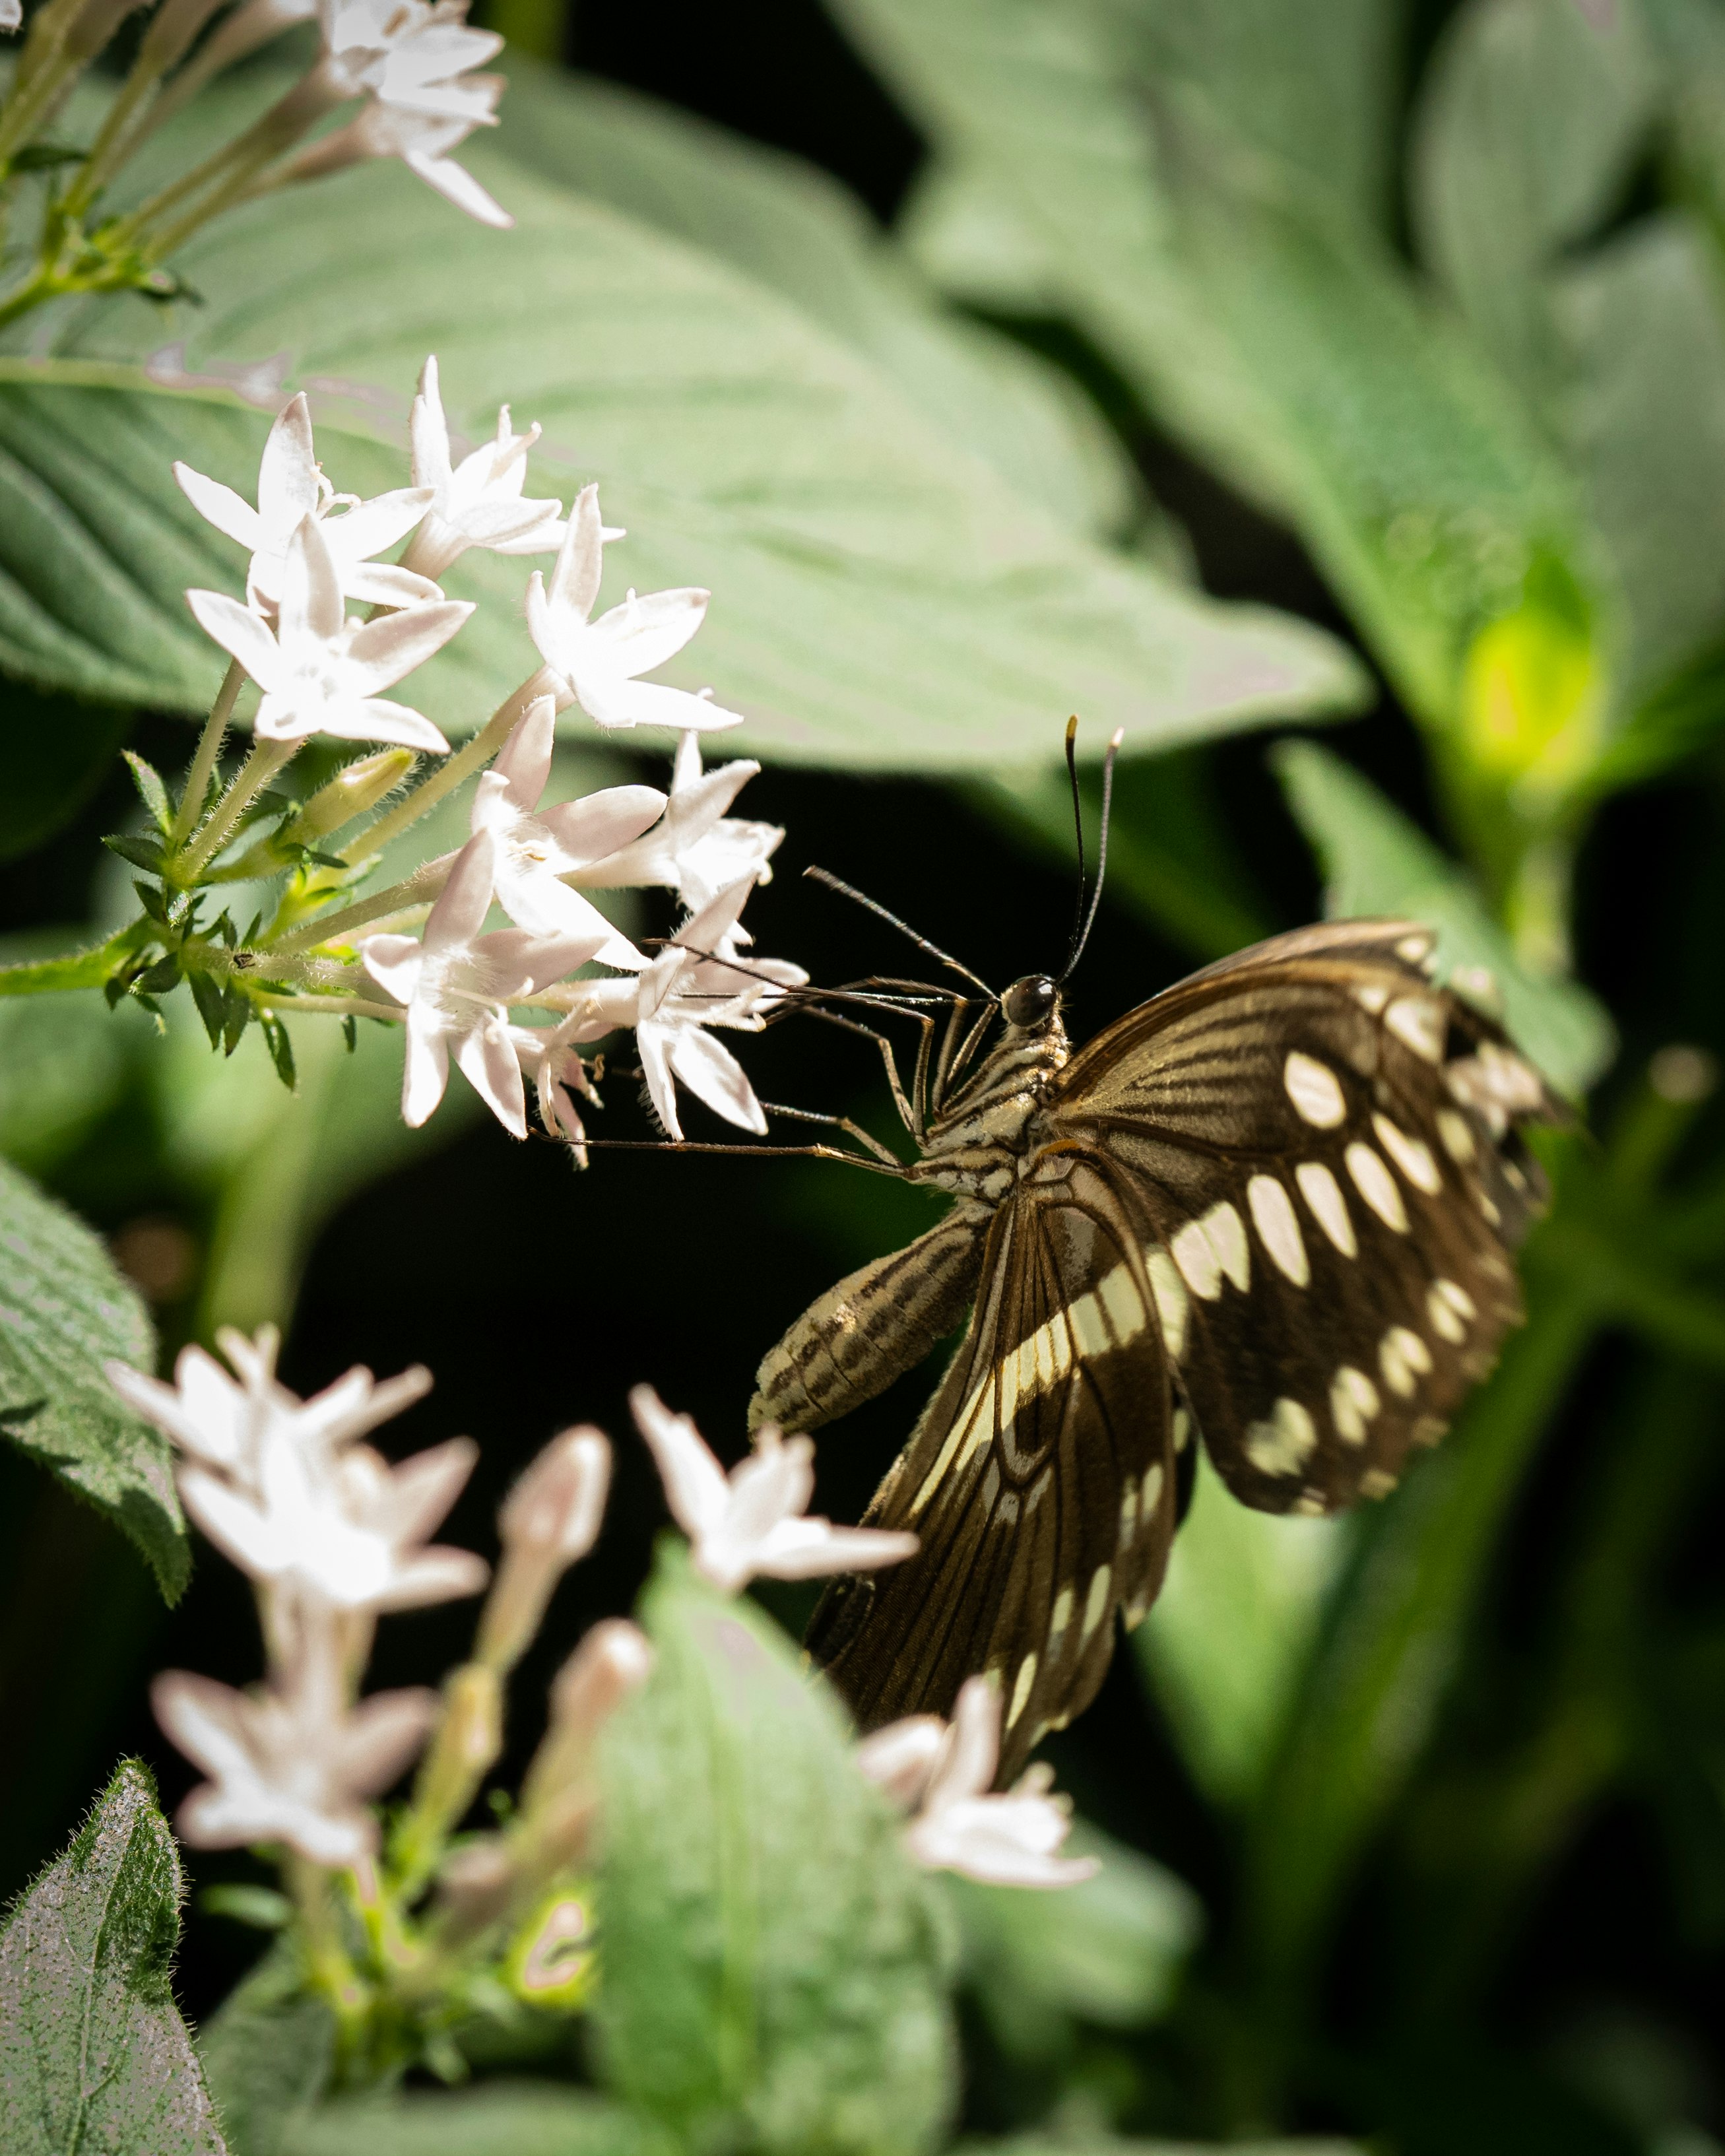 black and white butterfly perched on white flower